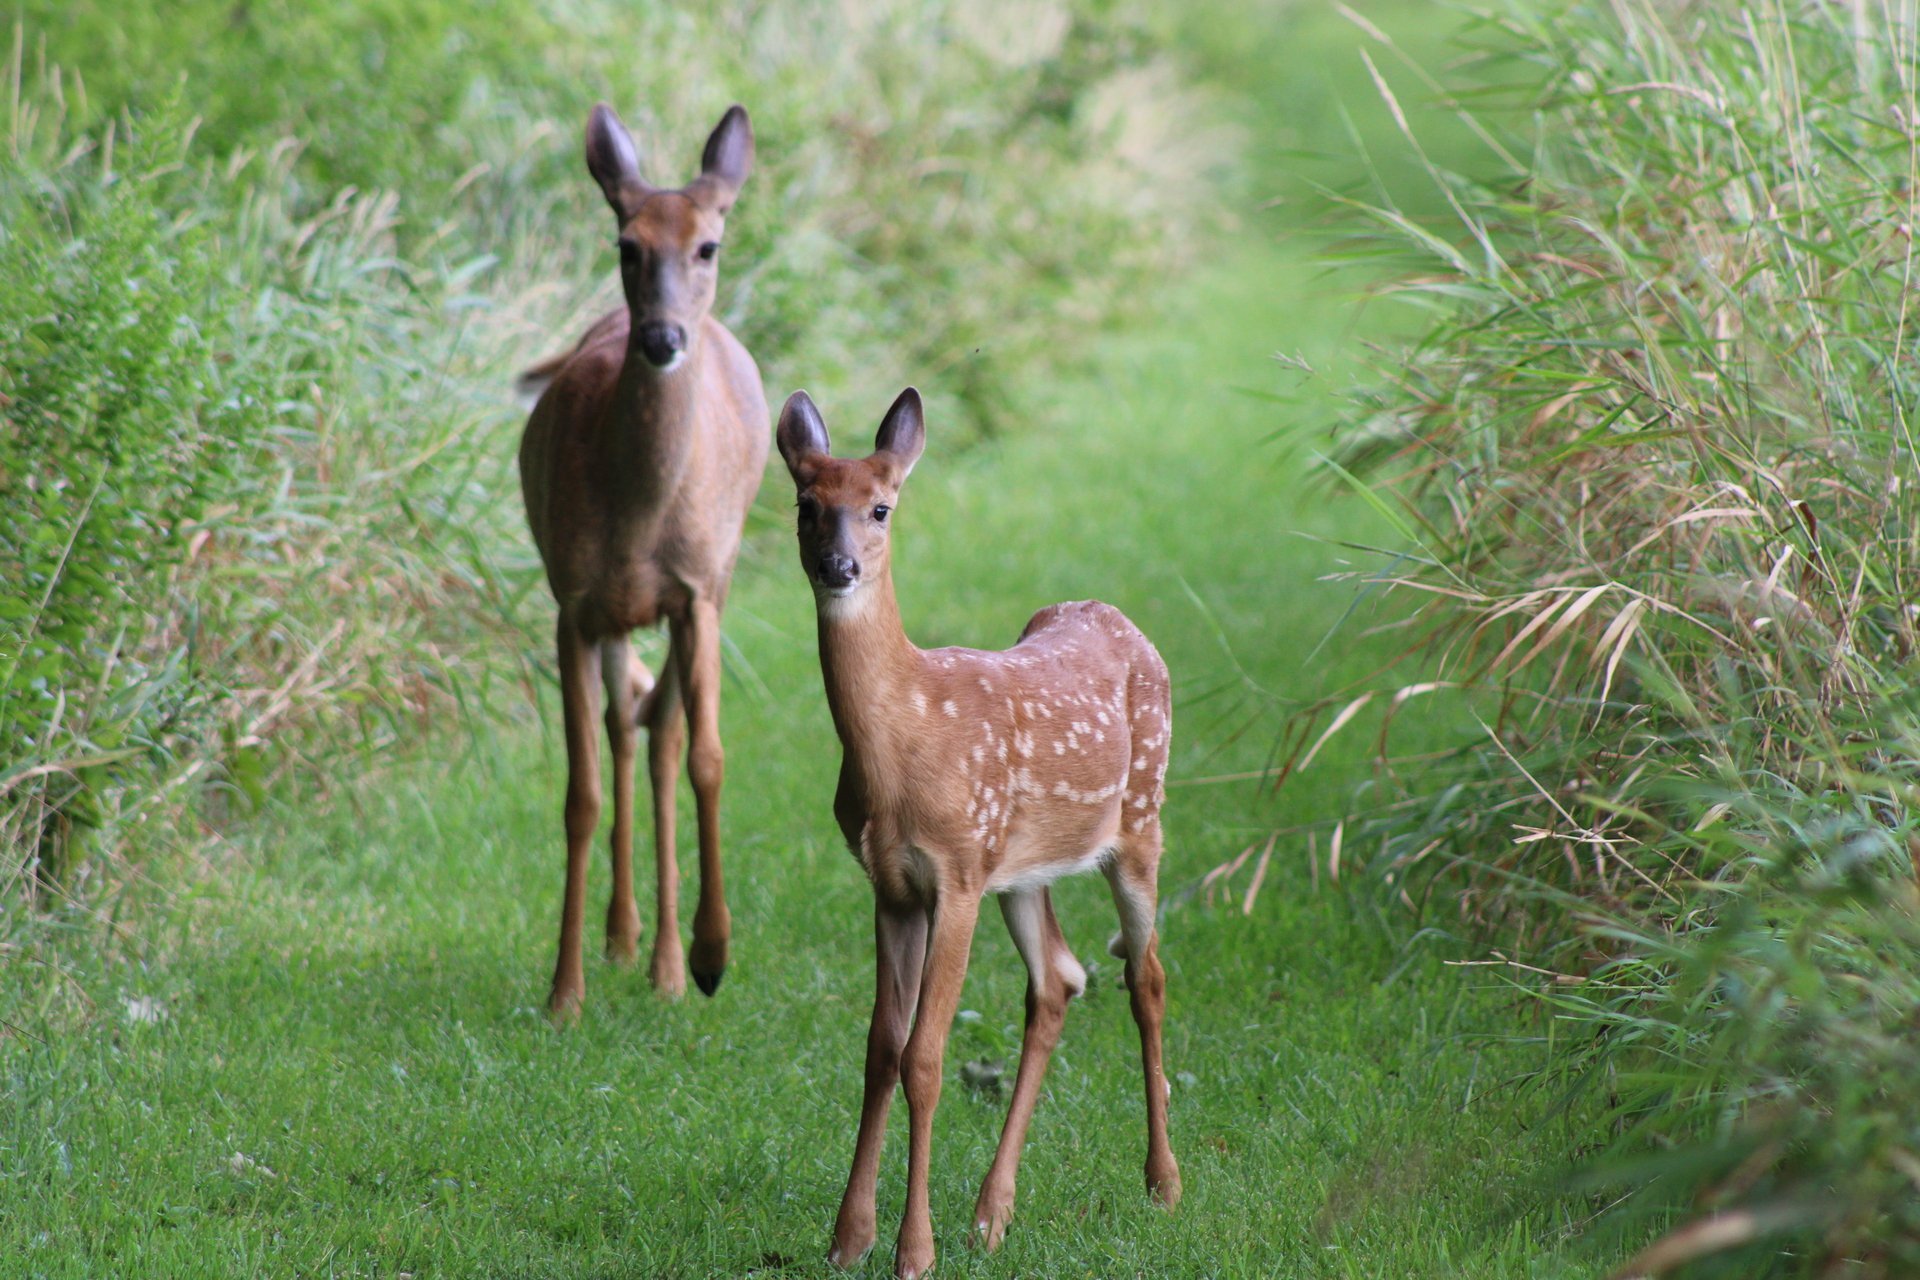 Two dear standing on a grassy path. The deer closest to the camera still has white fawn spots.